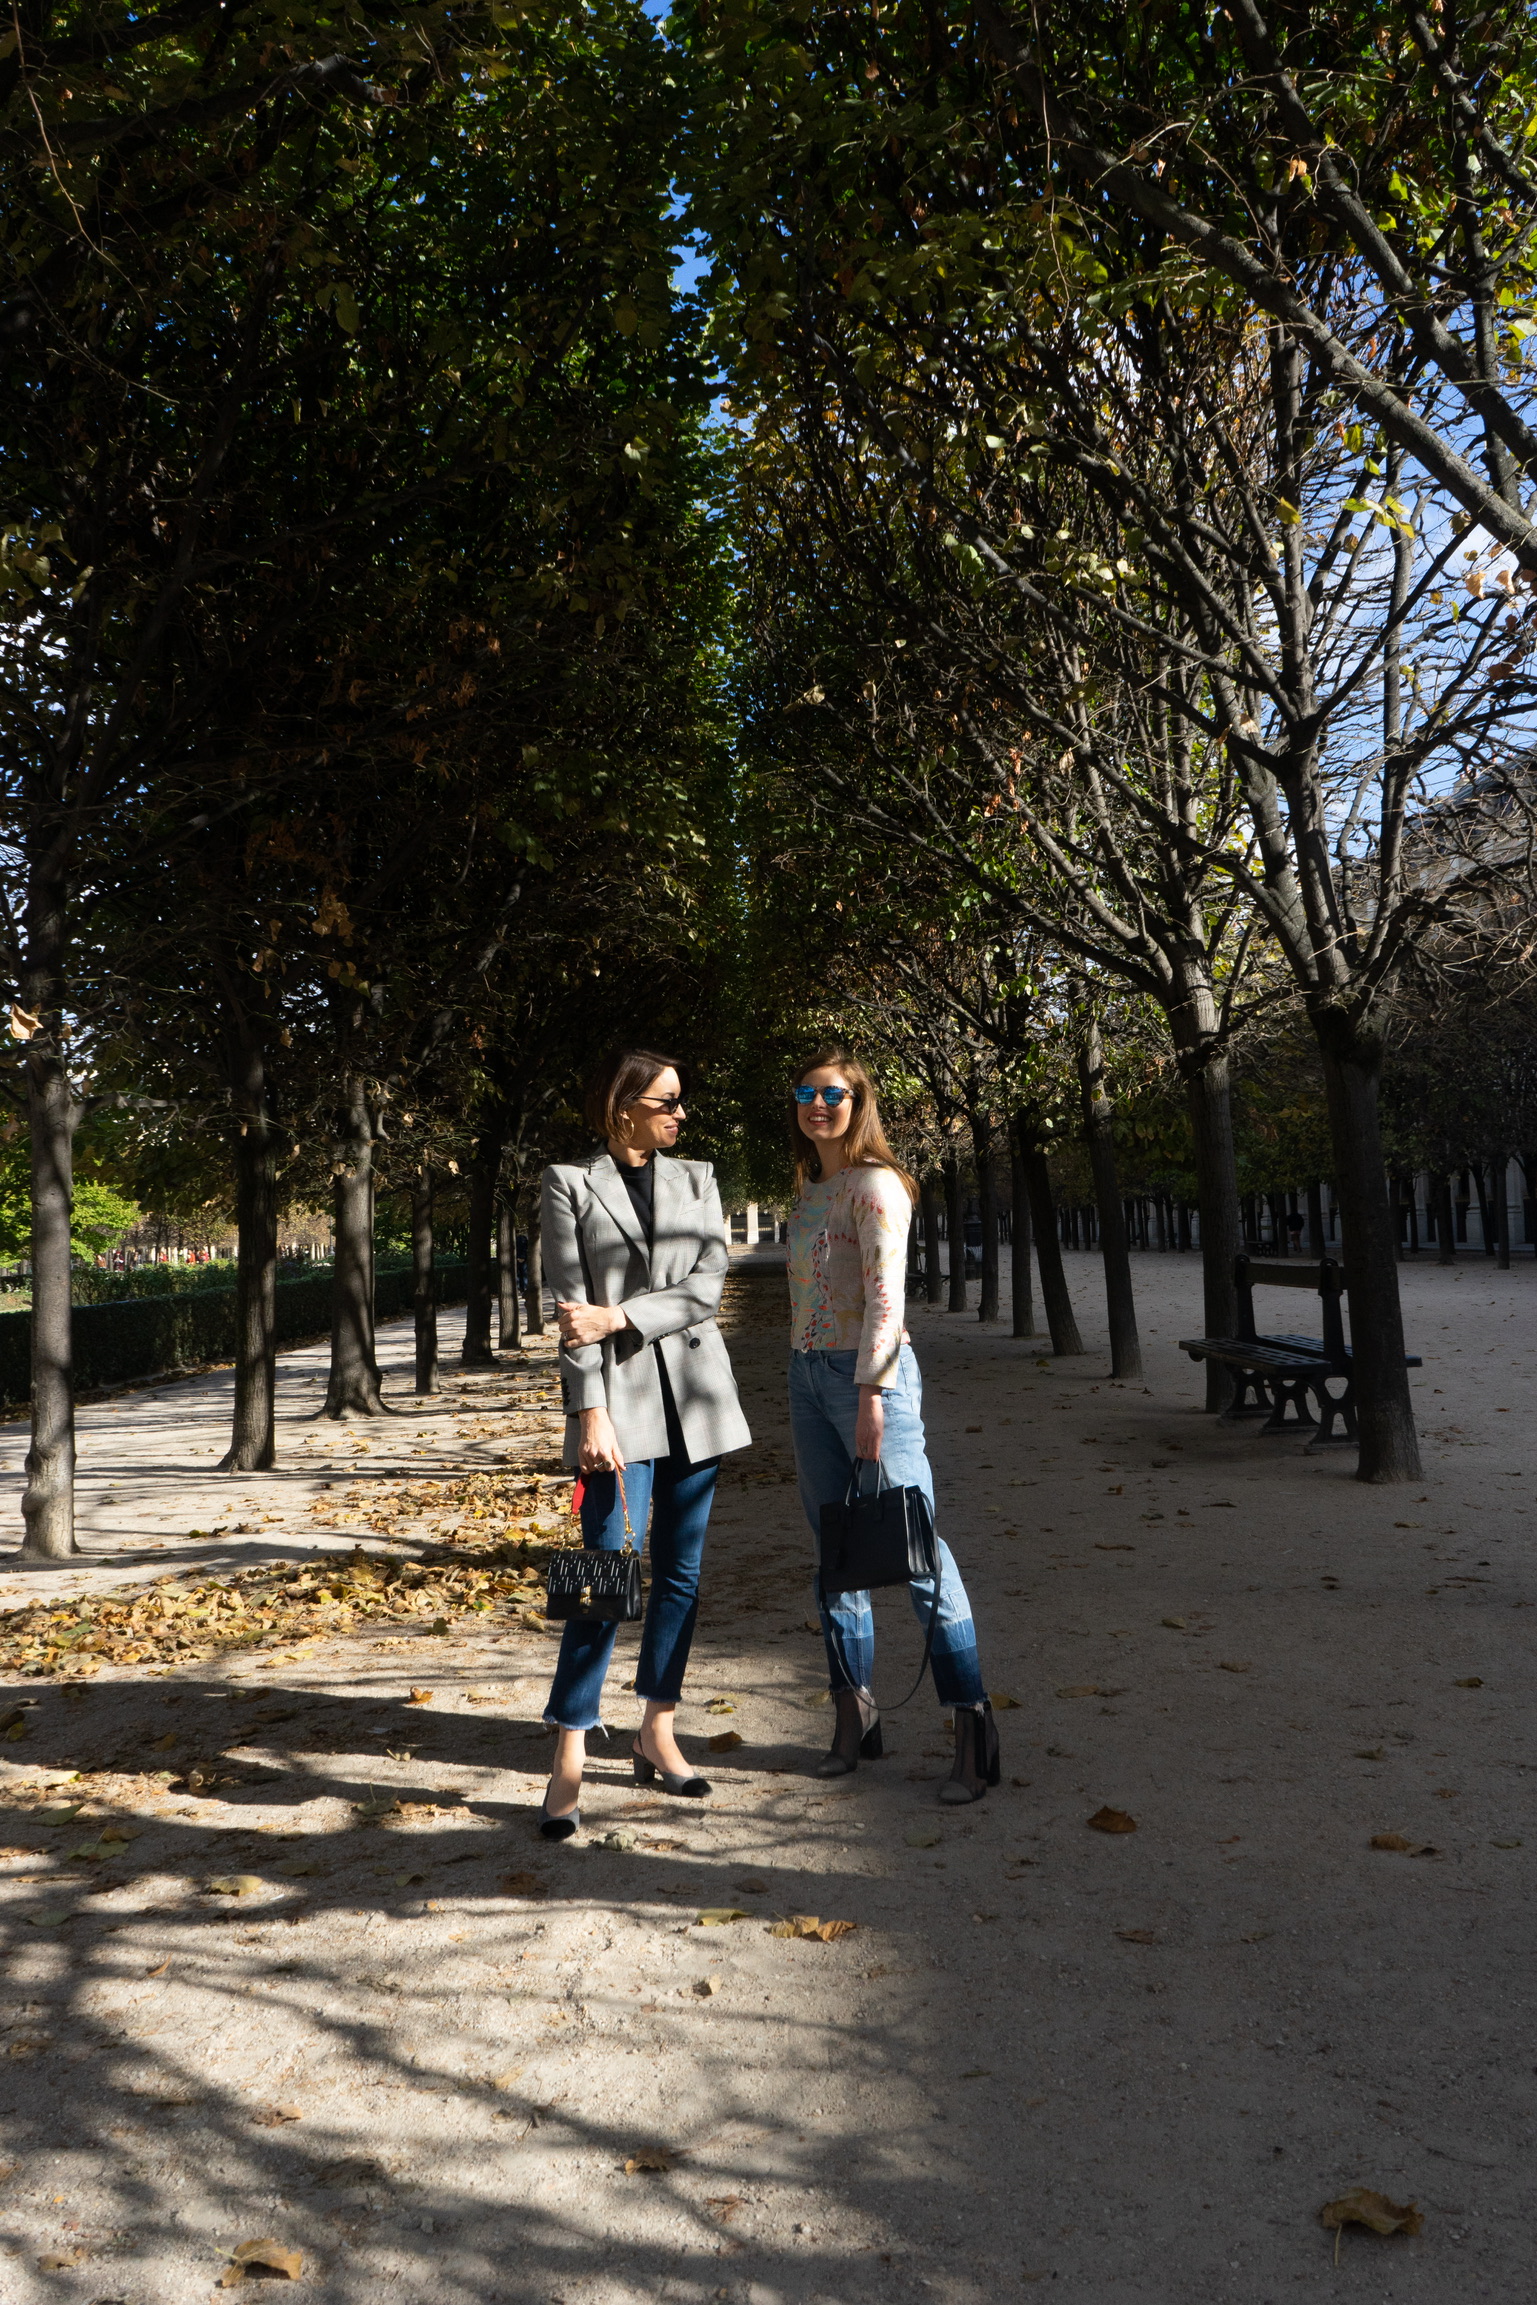 Two women standing in a park: one wearing a blazer and jeans and the other wearing a printed top and jeans